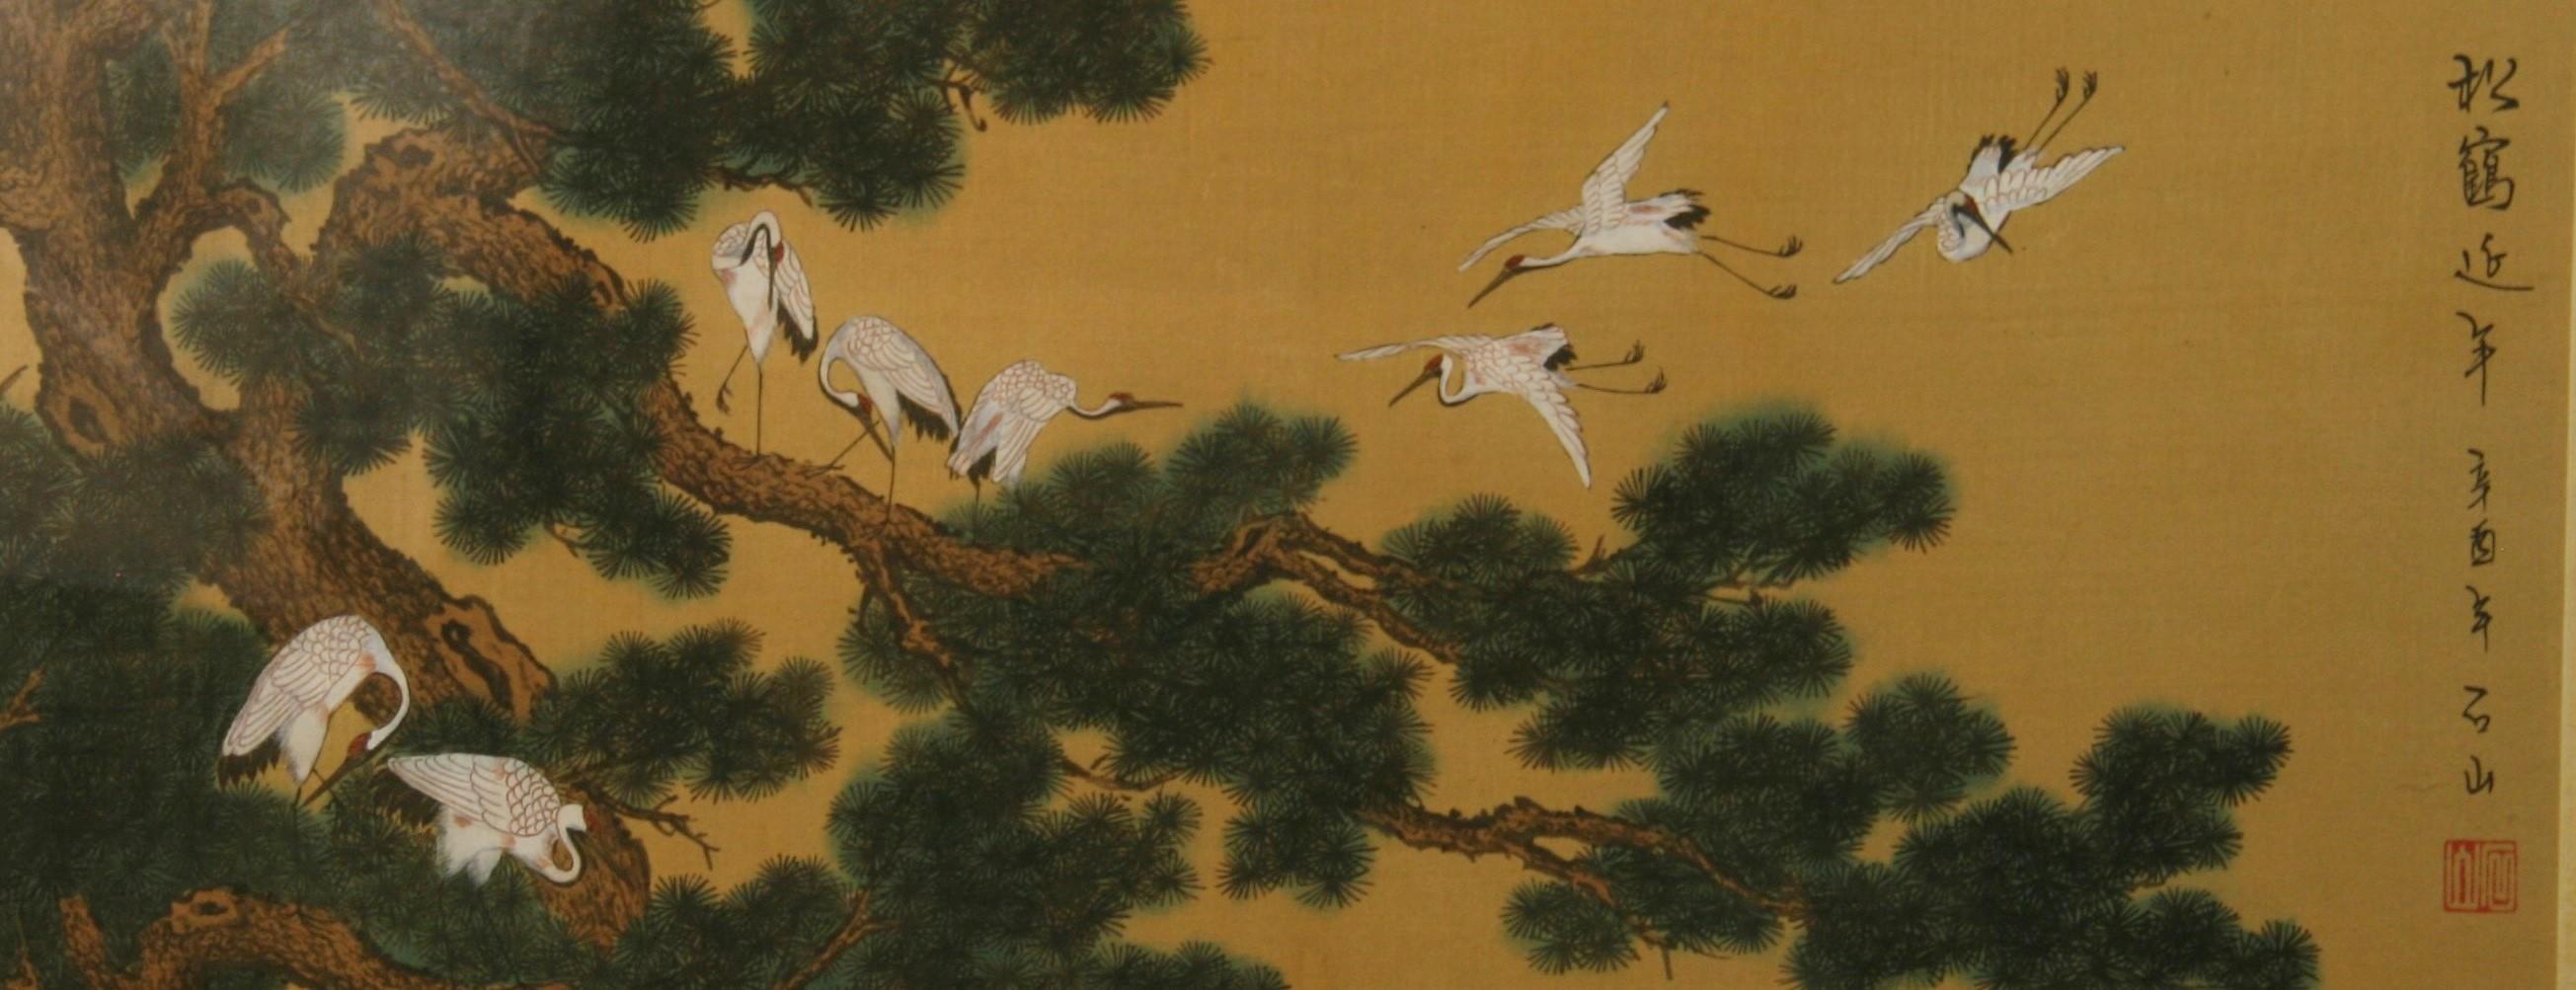 Unknown Animal Painting - Japanese Landscape and Cranes Painting on Silk #One